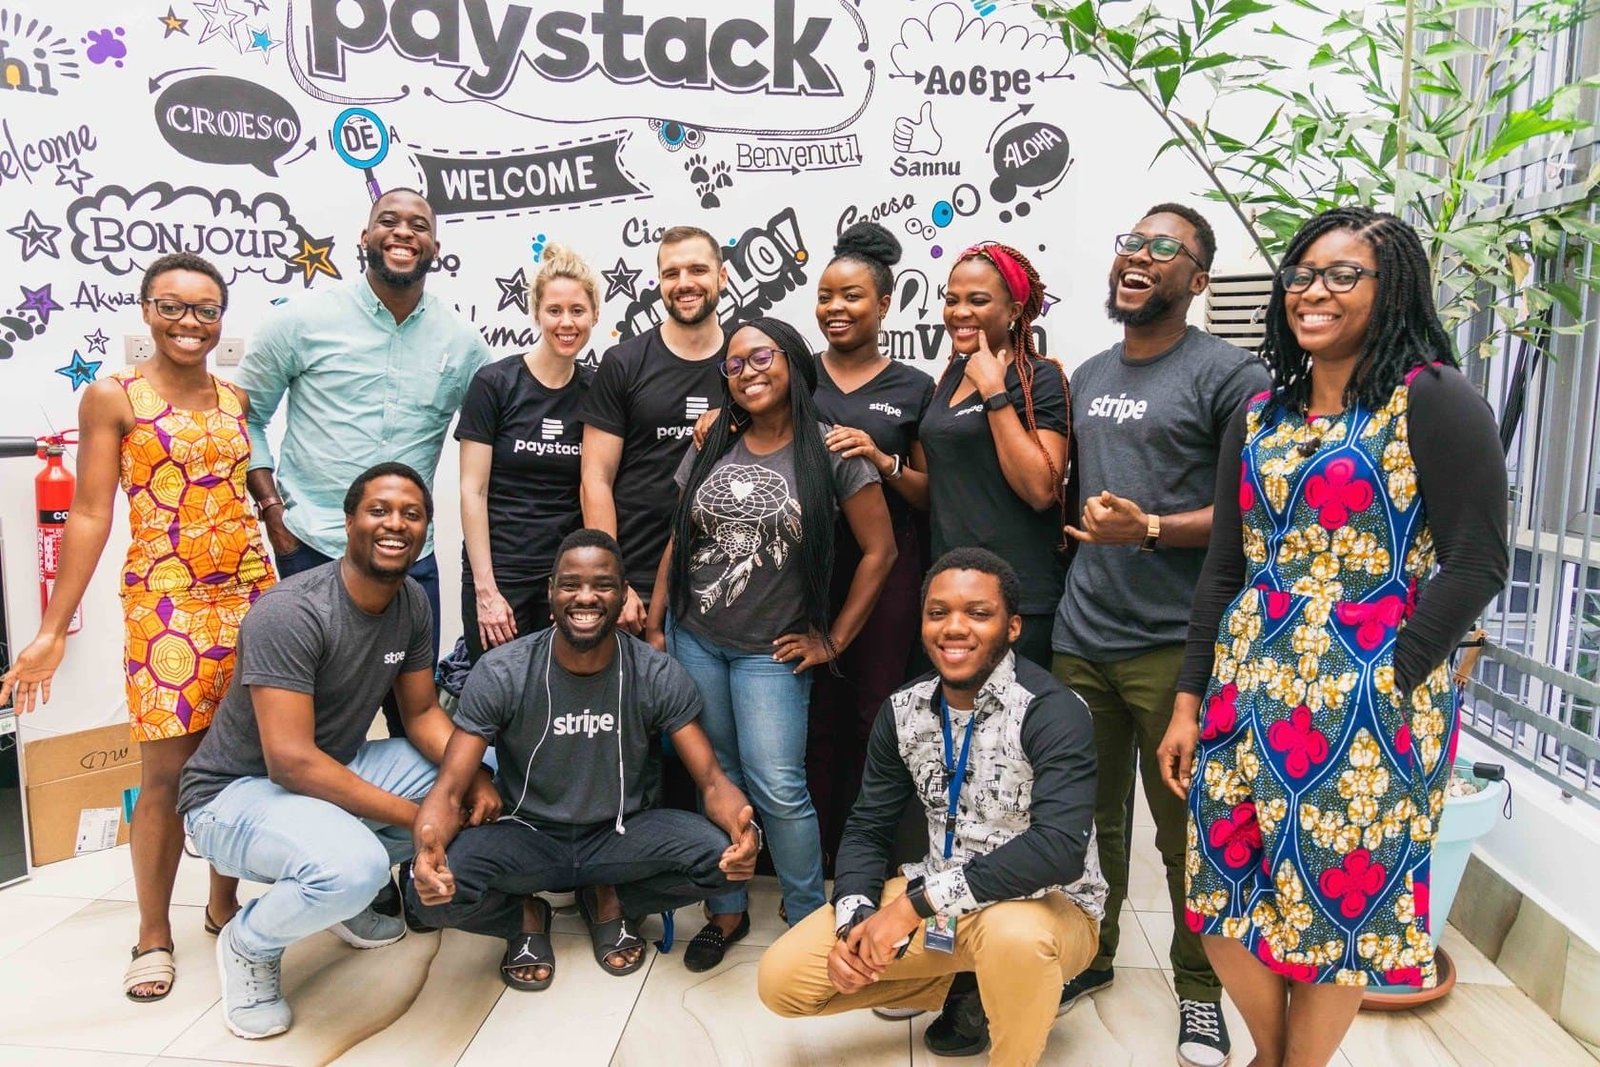 Nigerian start-up Paystack acquired by Stripe for over $200m